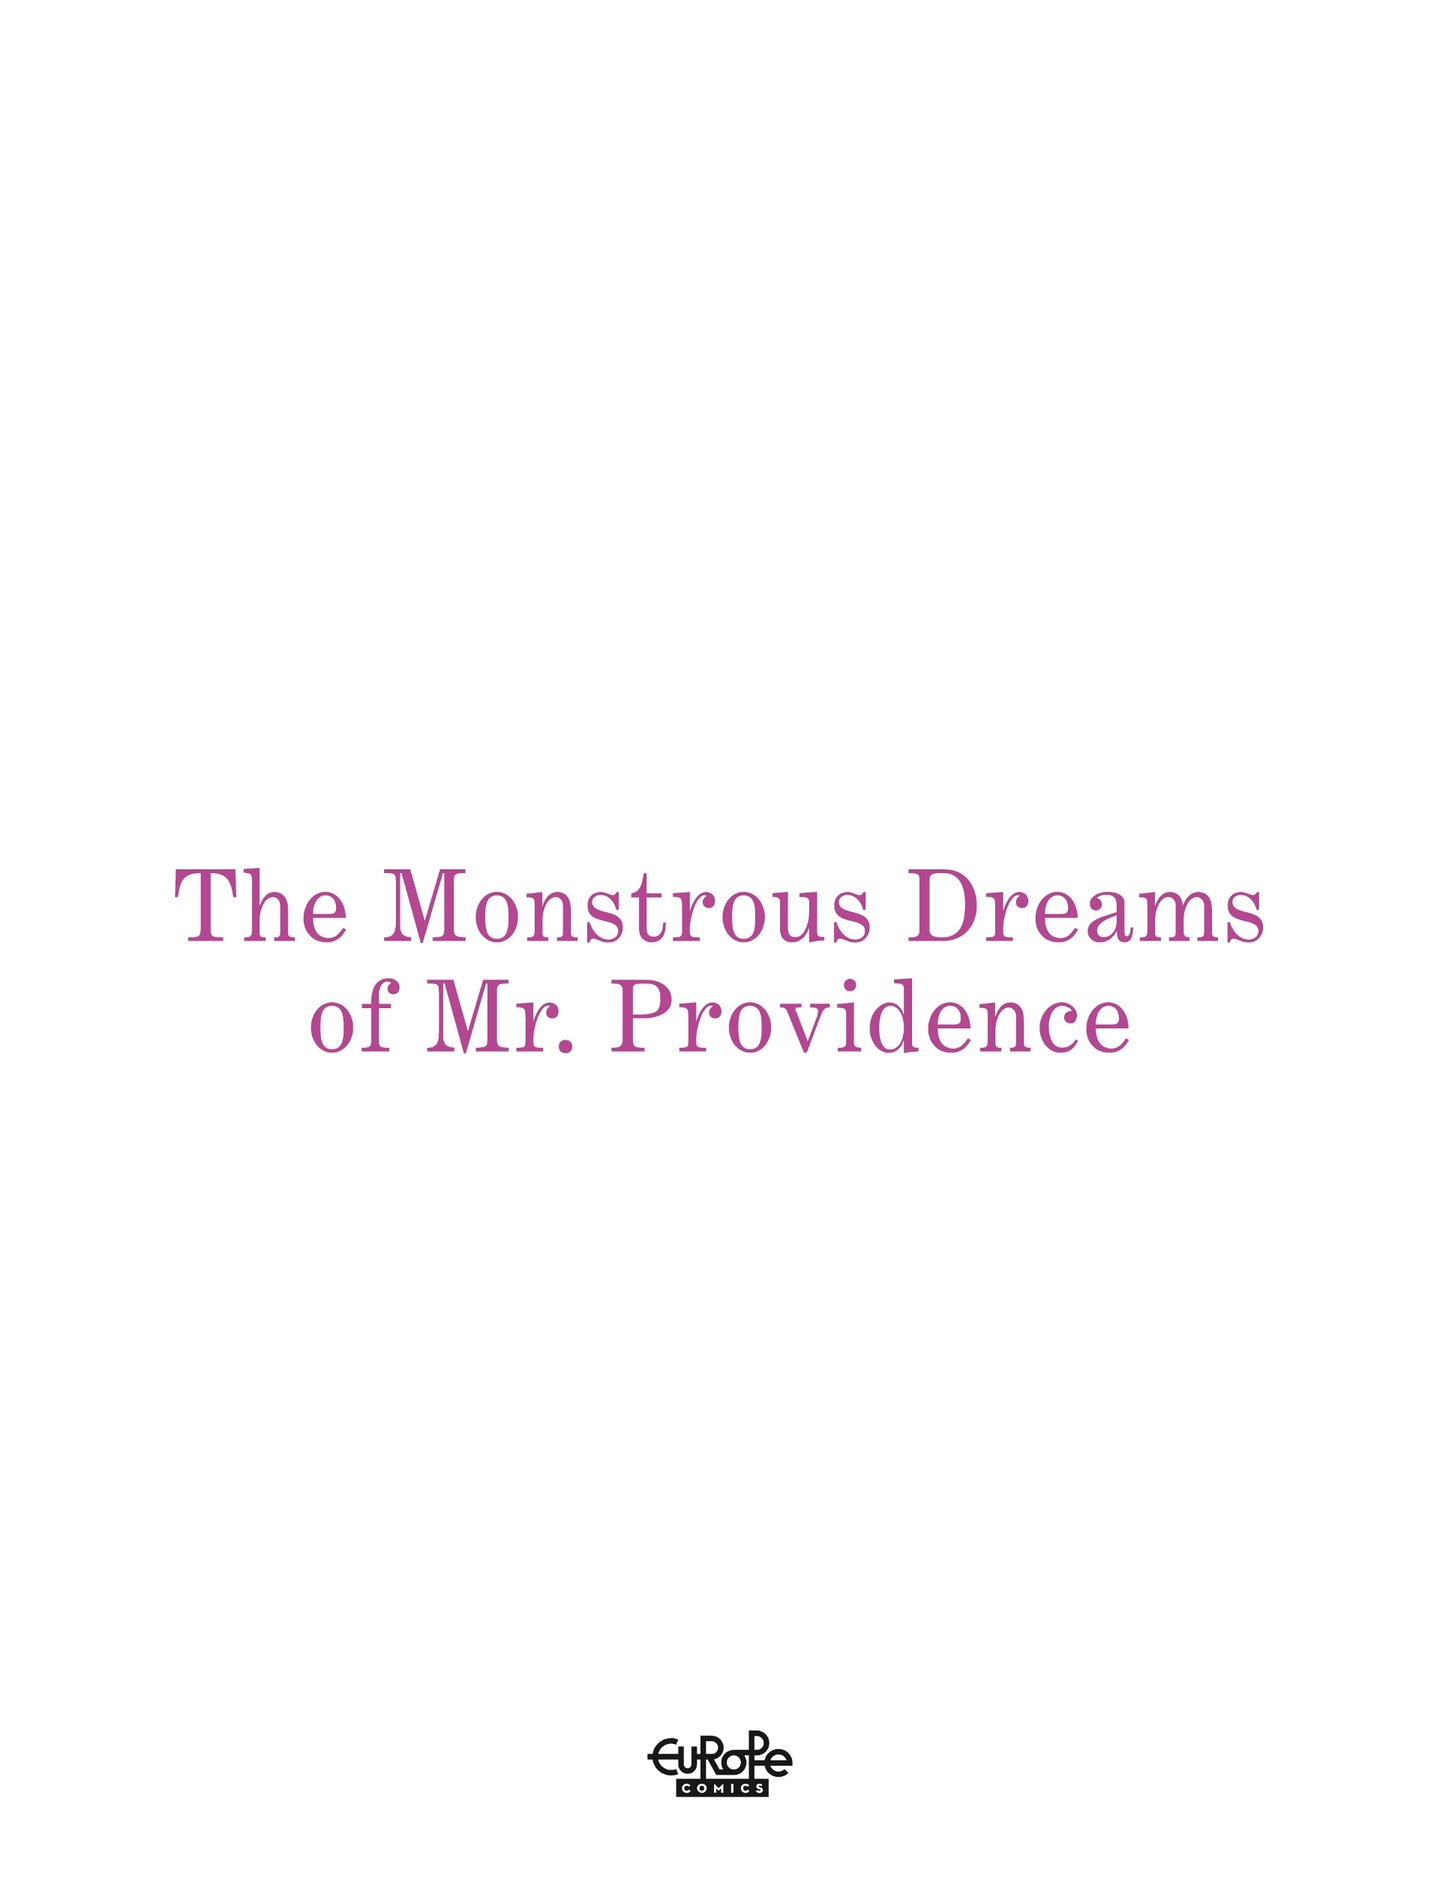 Read online The Monstrous Dreams of Mr. Providence comic -  Issue # TPB - 6